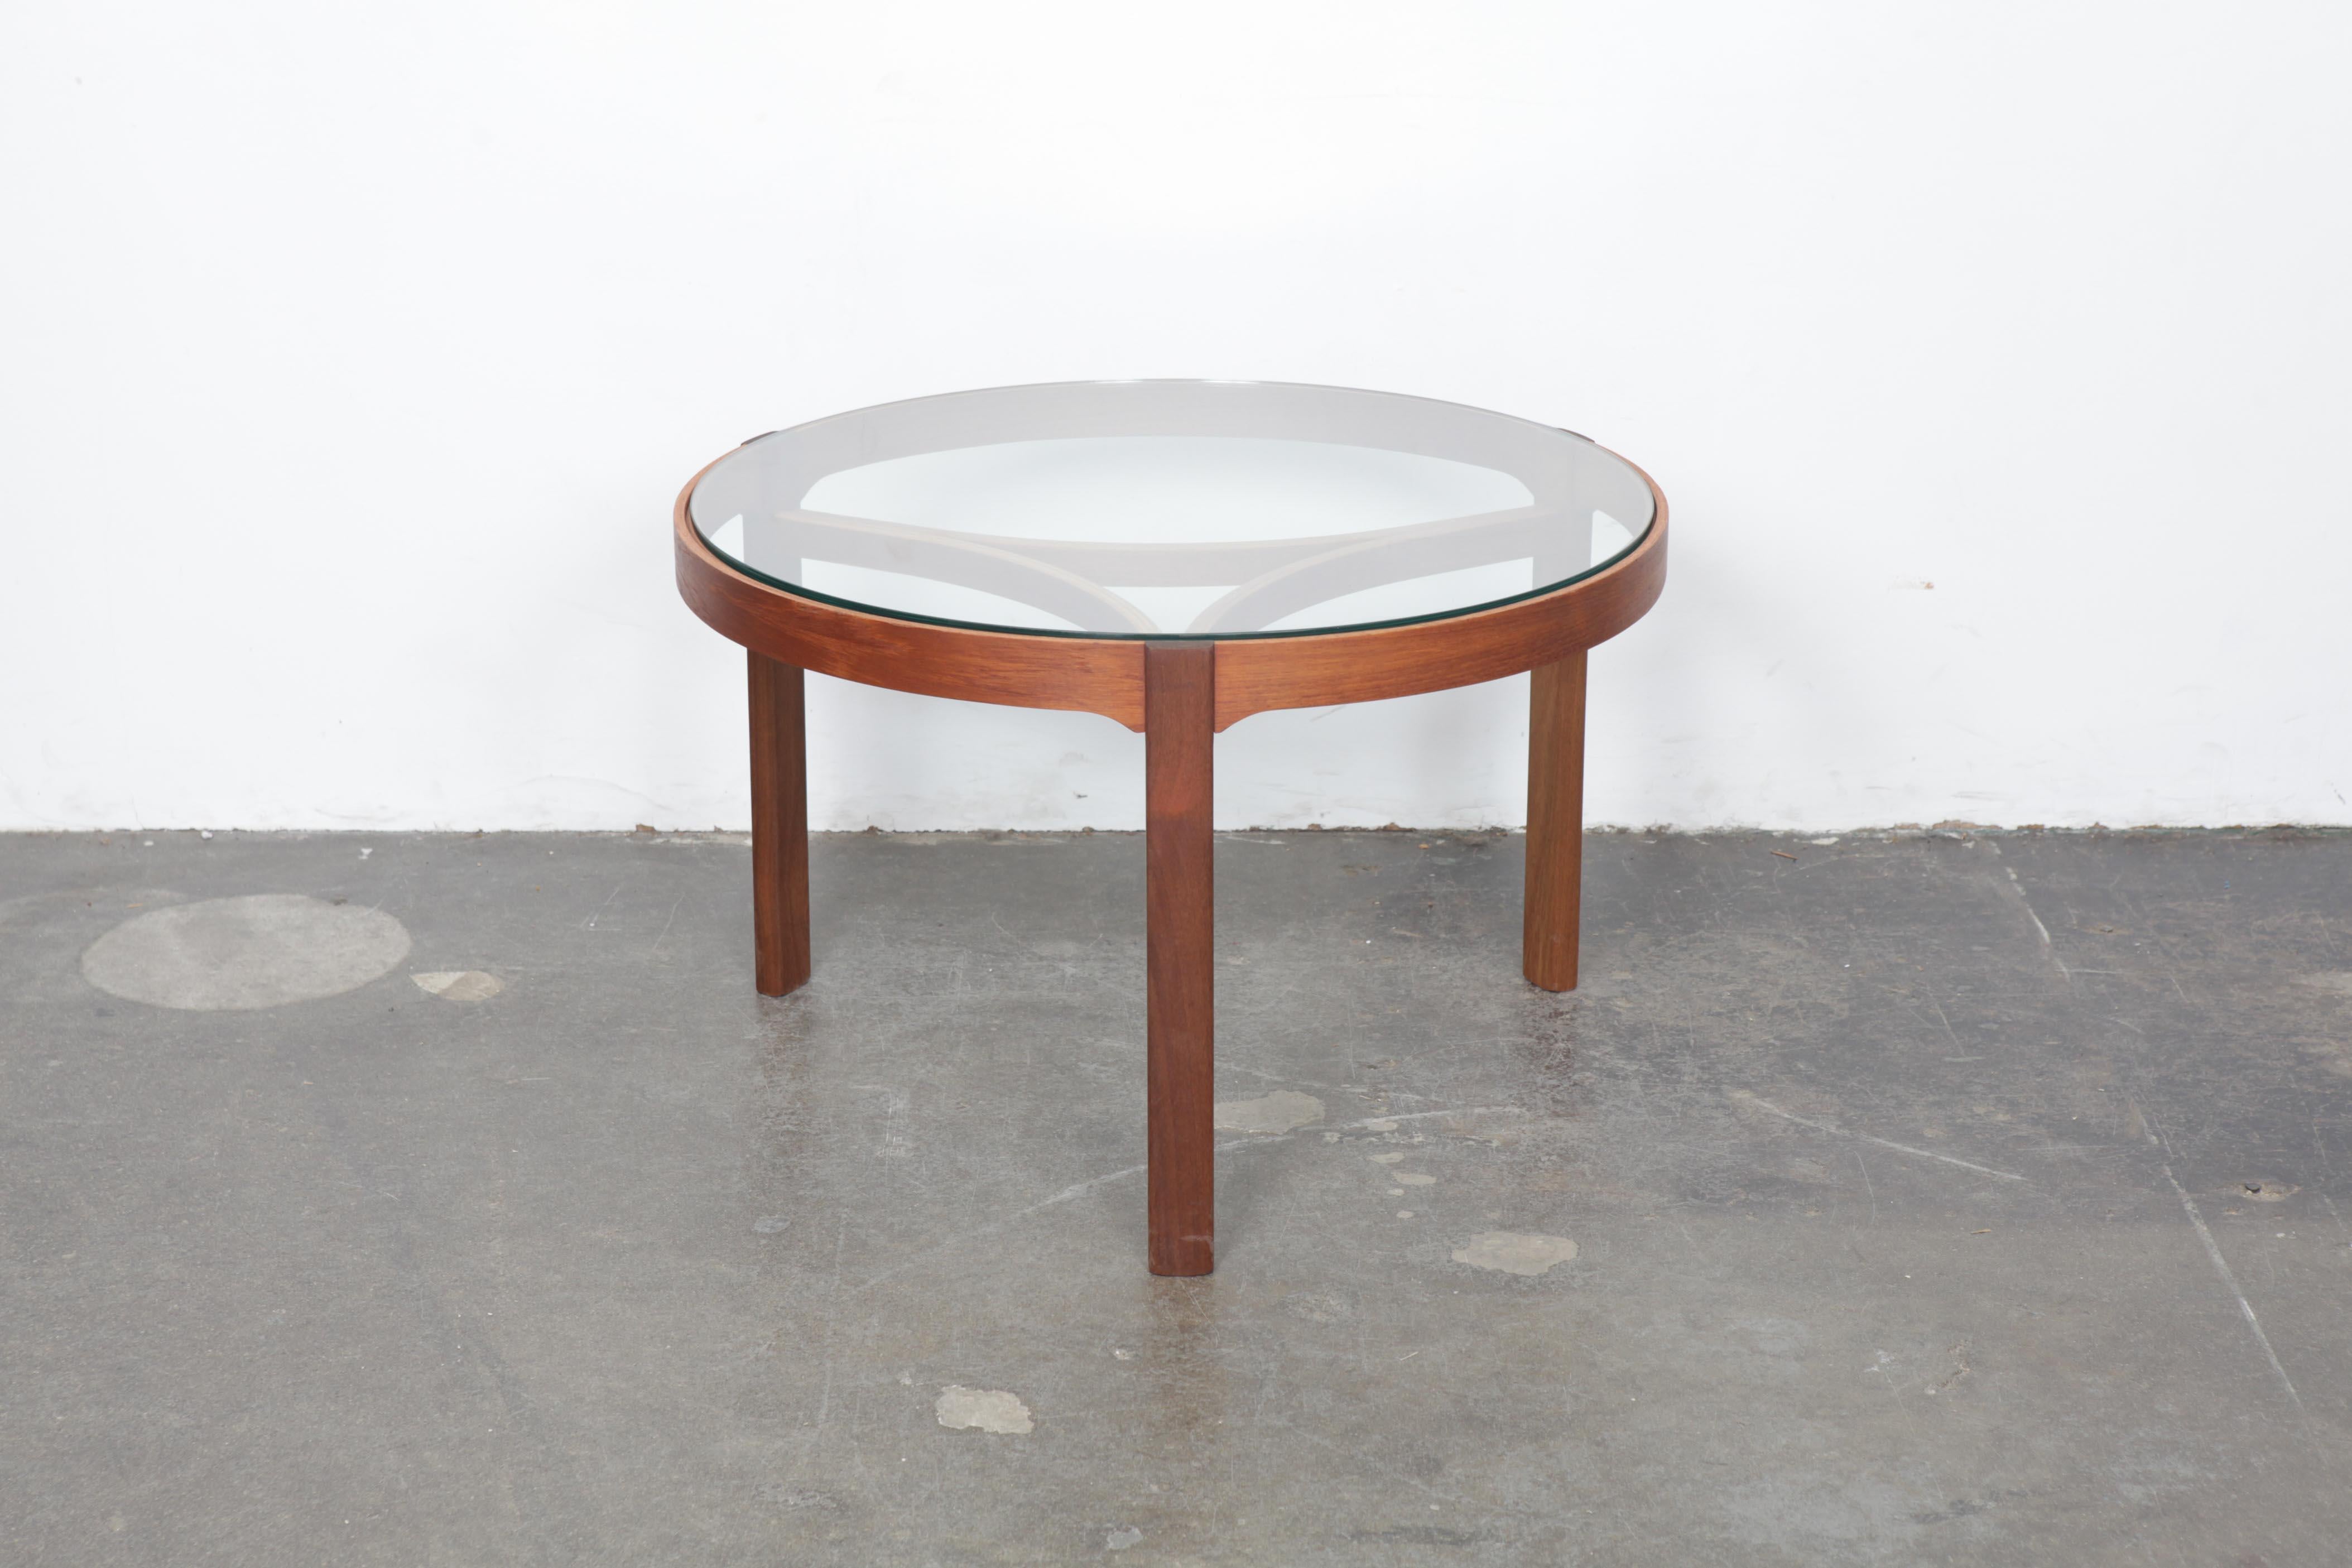 English circa 1960s teak and glass top round coffee table, it has been newly refinished and has a brand new glass top, produced by Nathan of England. Beautiful table with graceful curved leg supports exposed through the glass.